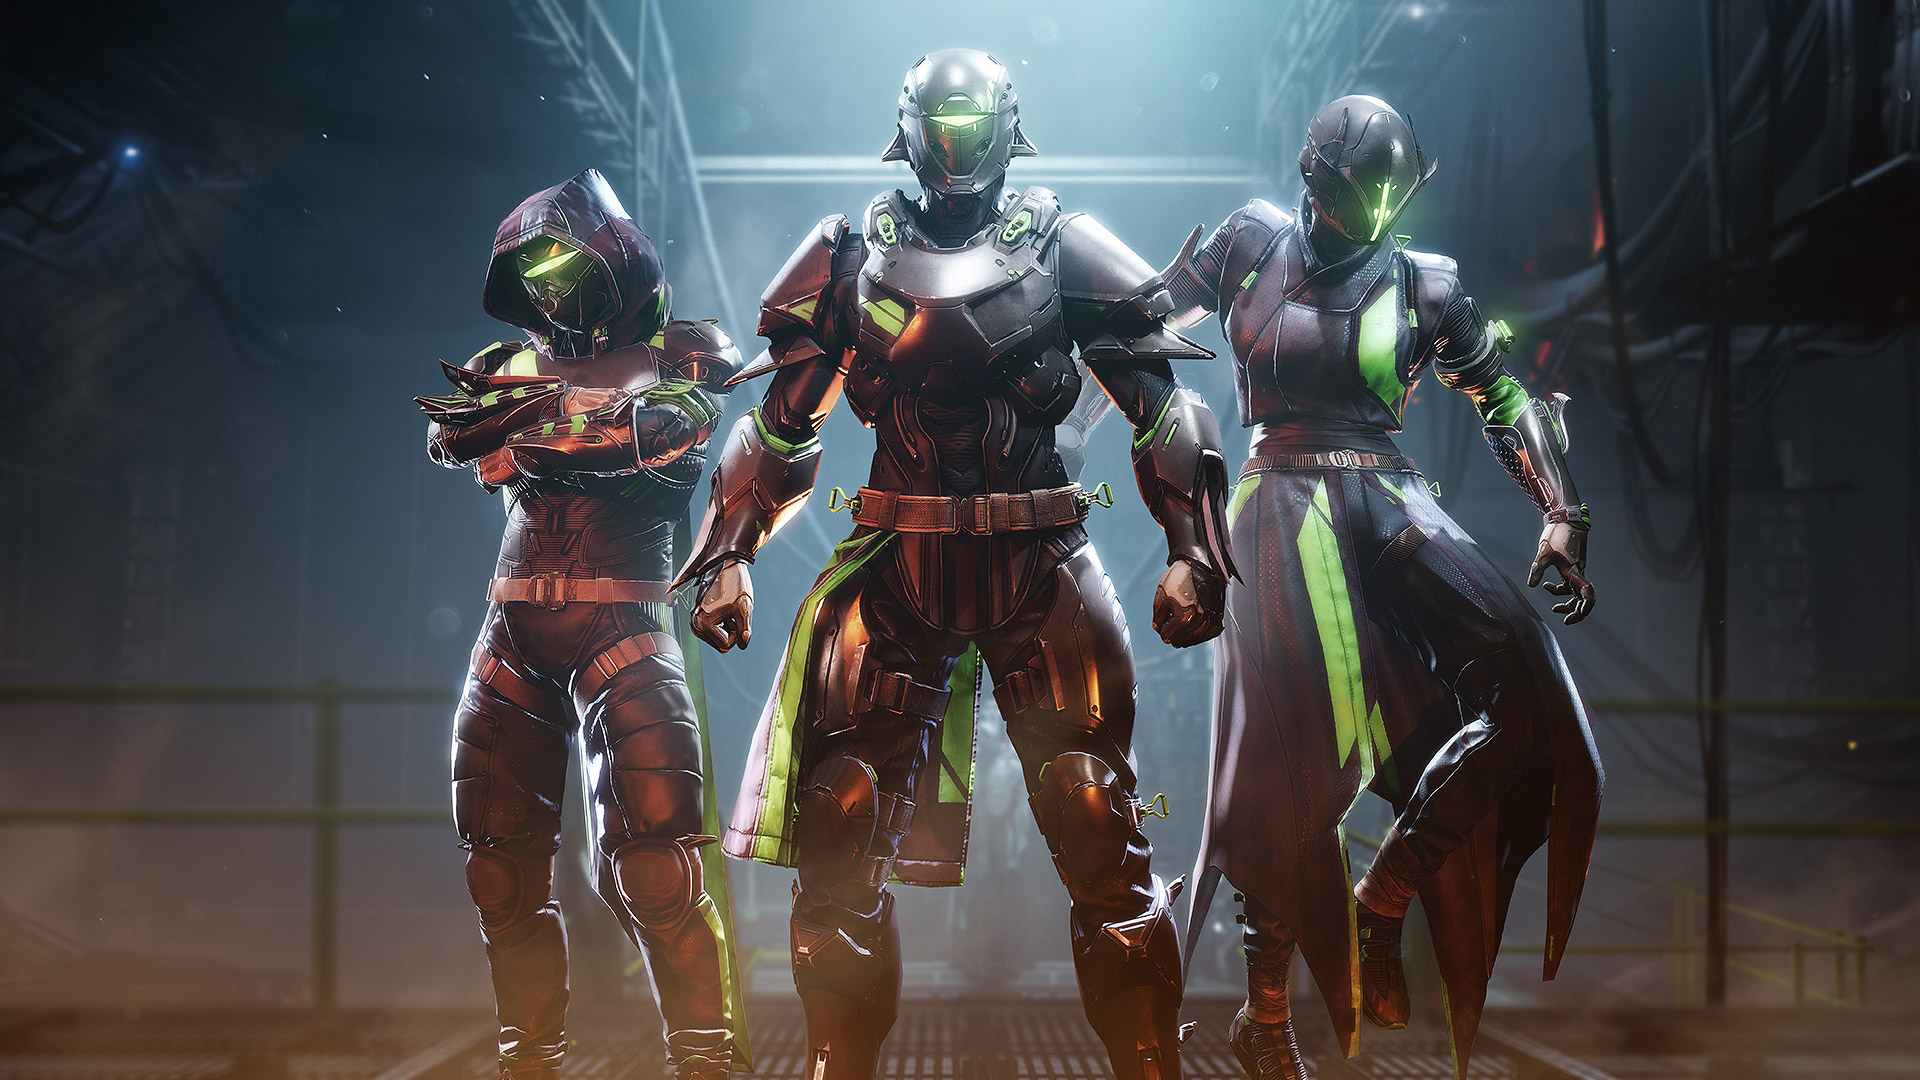 Three Destiny 2 Guardians stand together in their Veist-themed armor